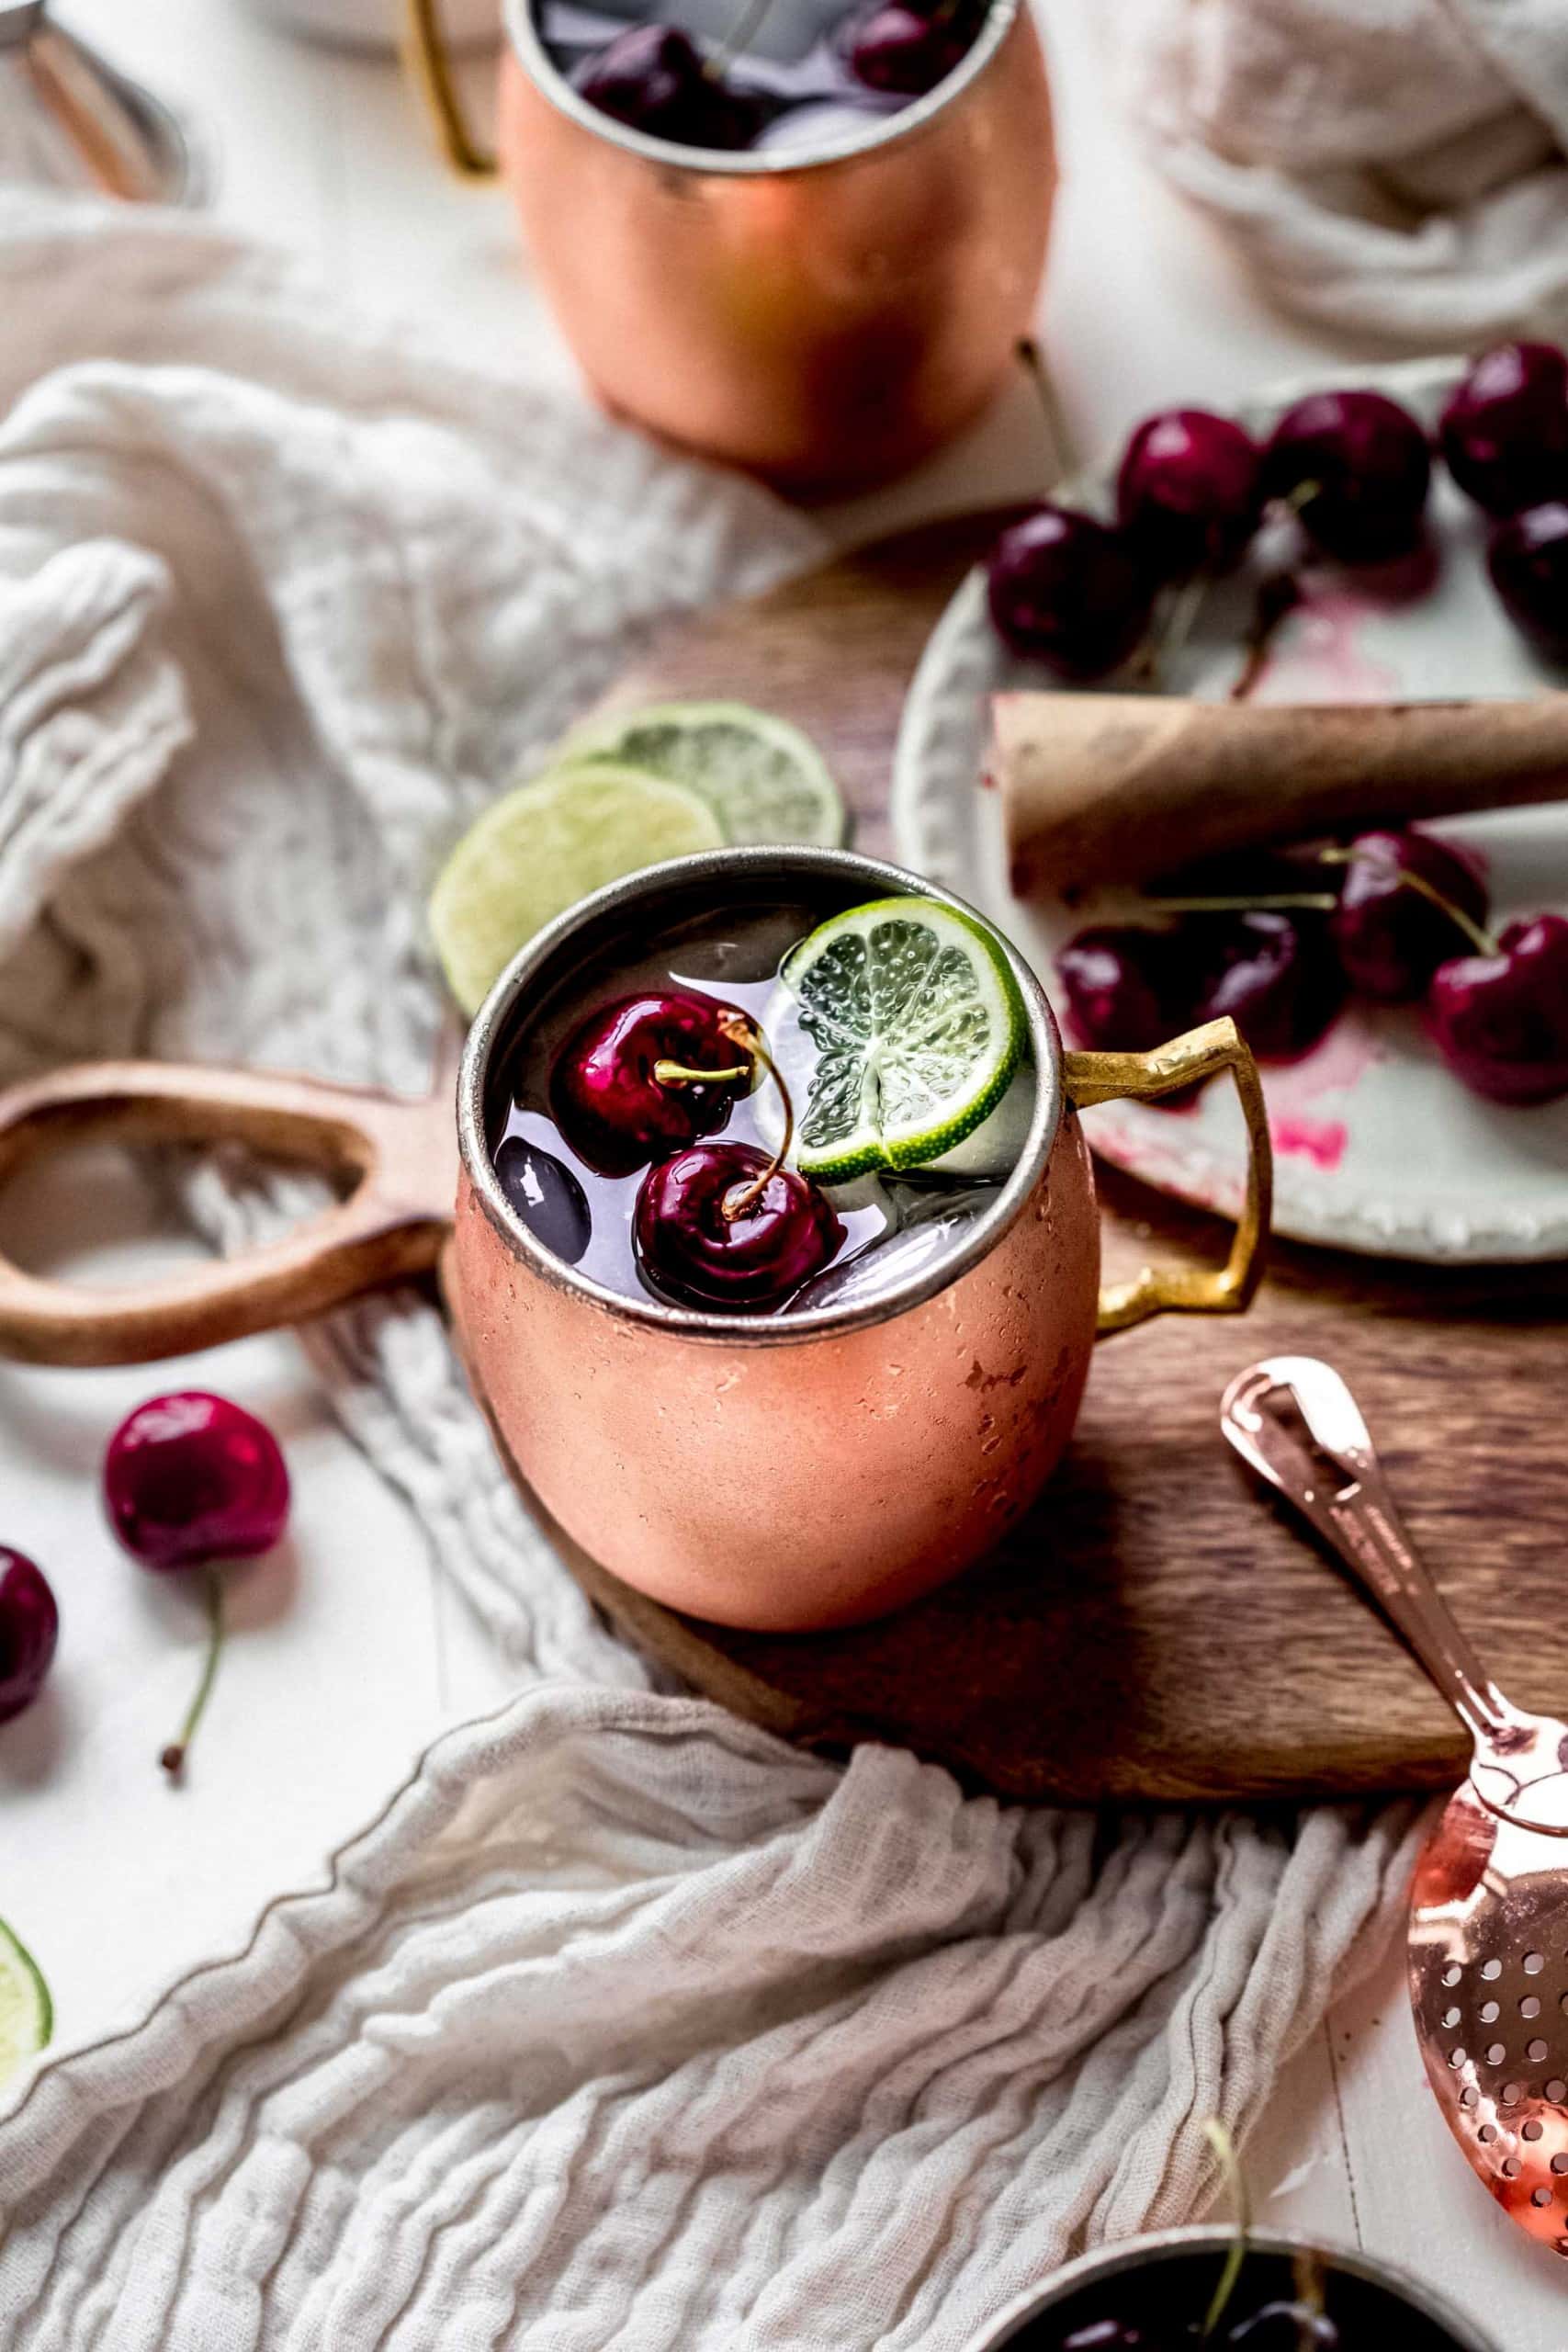 Cherry Moscow Mule